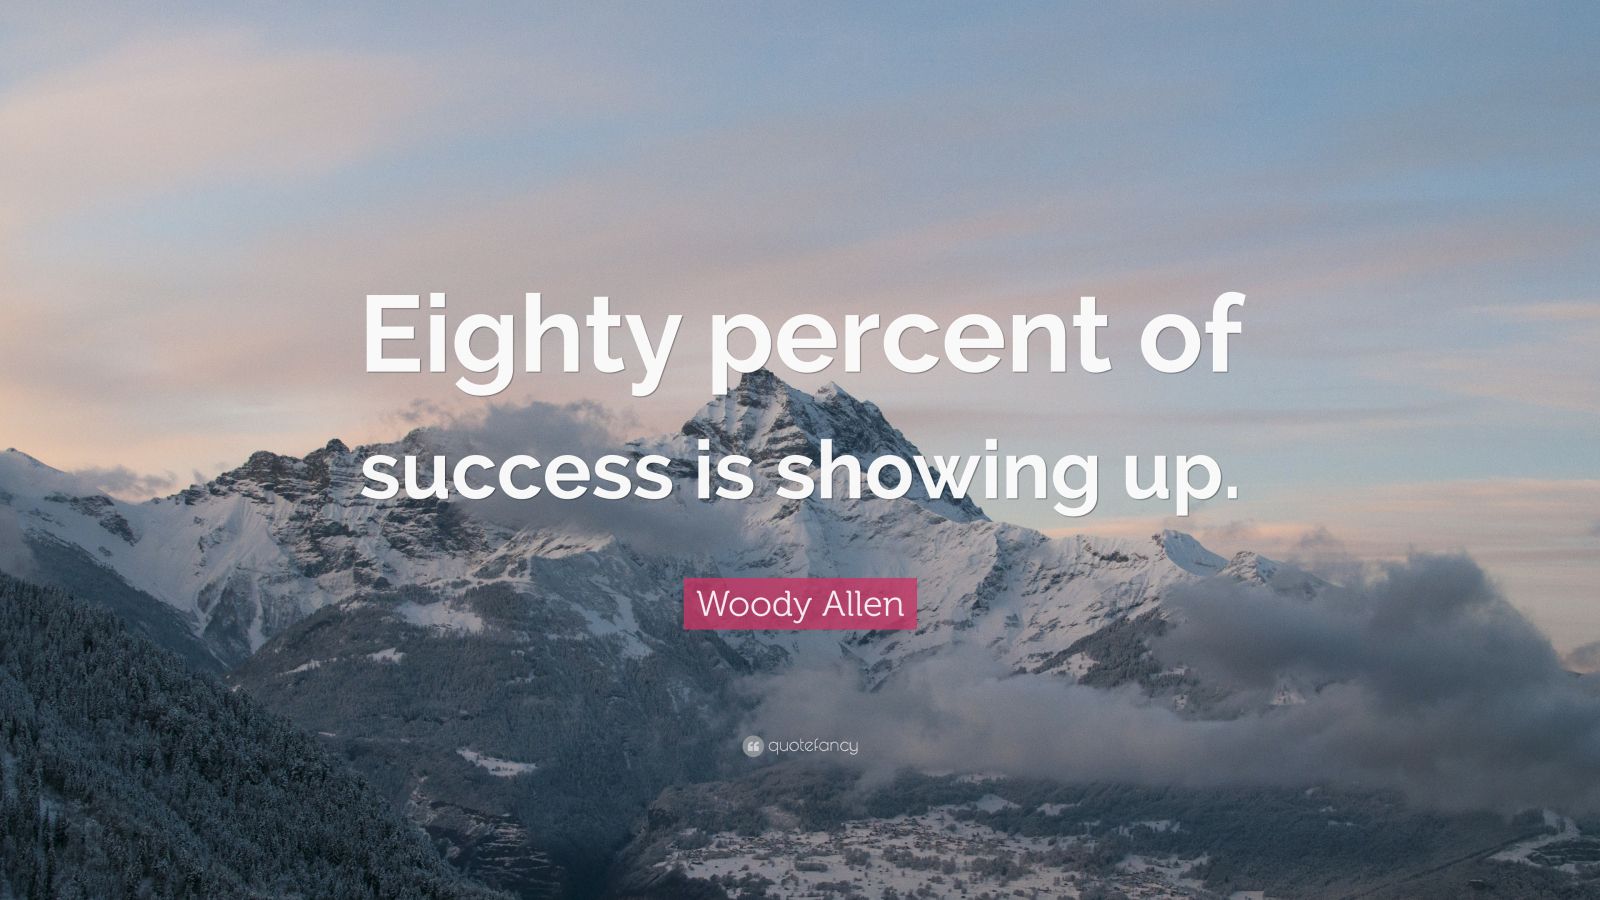 Woody Allen Quote “eighty Percent Of Success Is Showing Up” 23 Wallpapers Quotefancy 4756